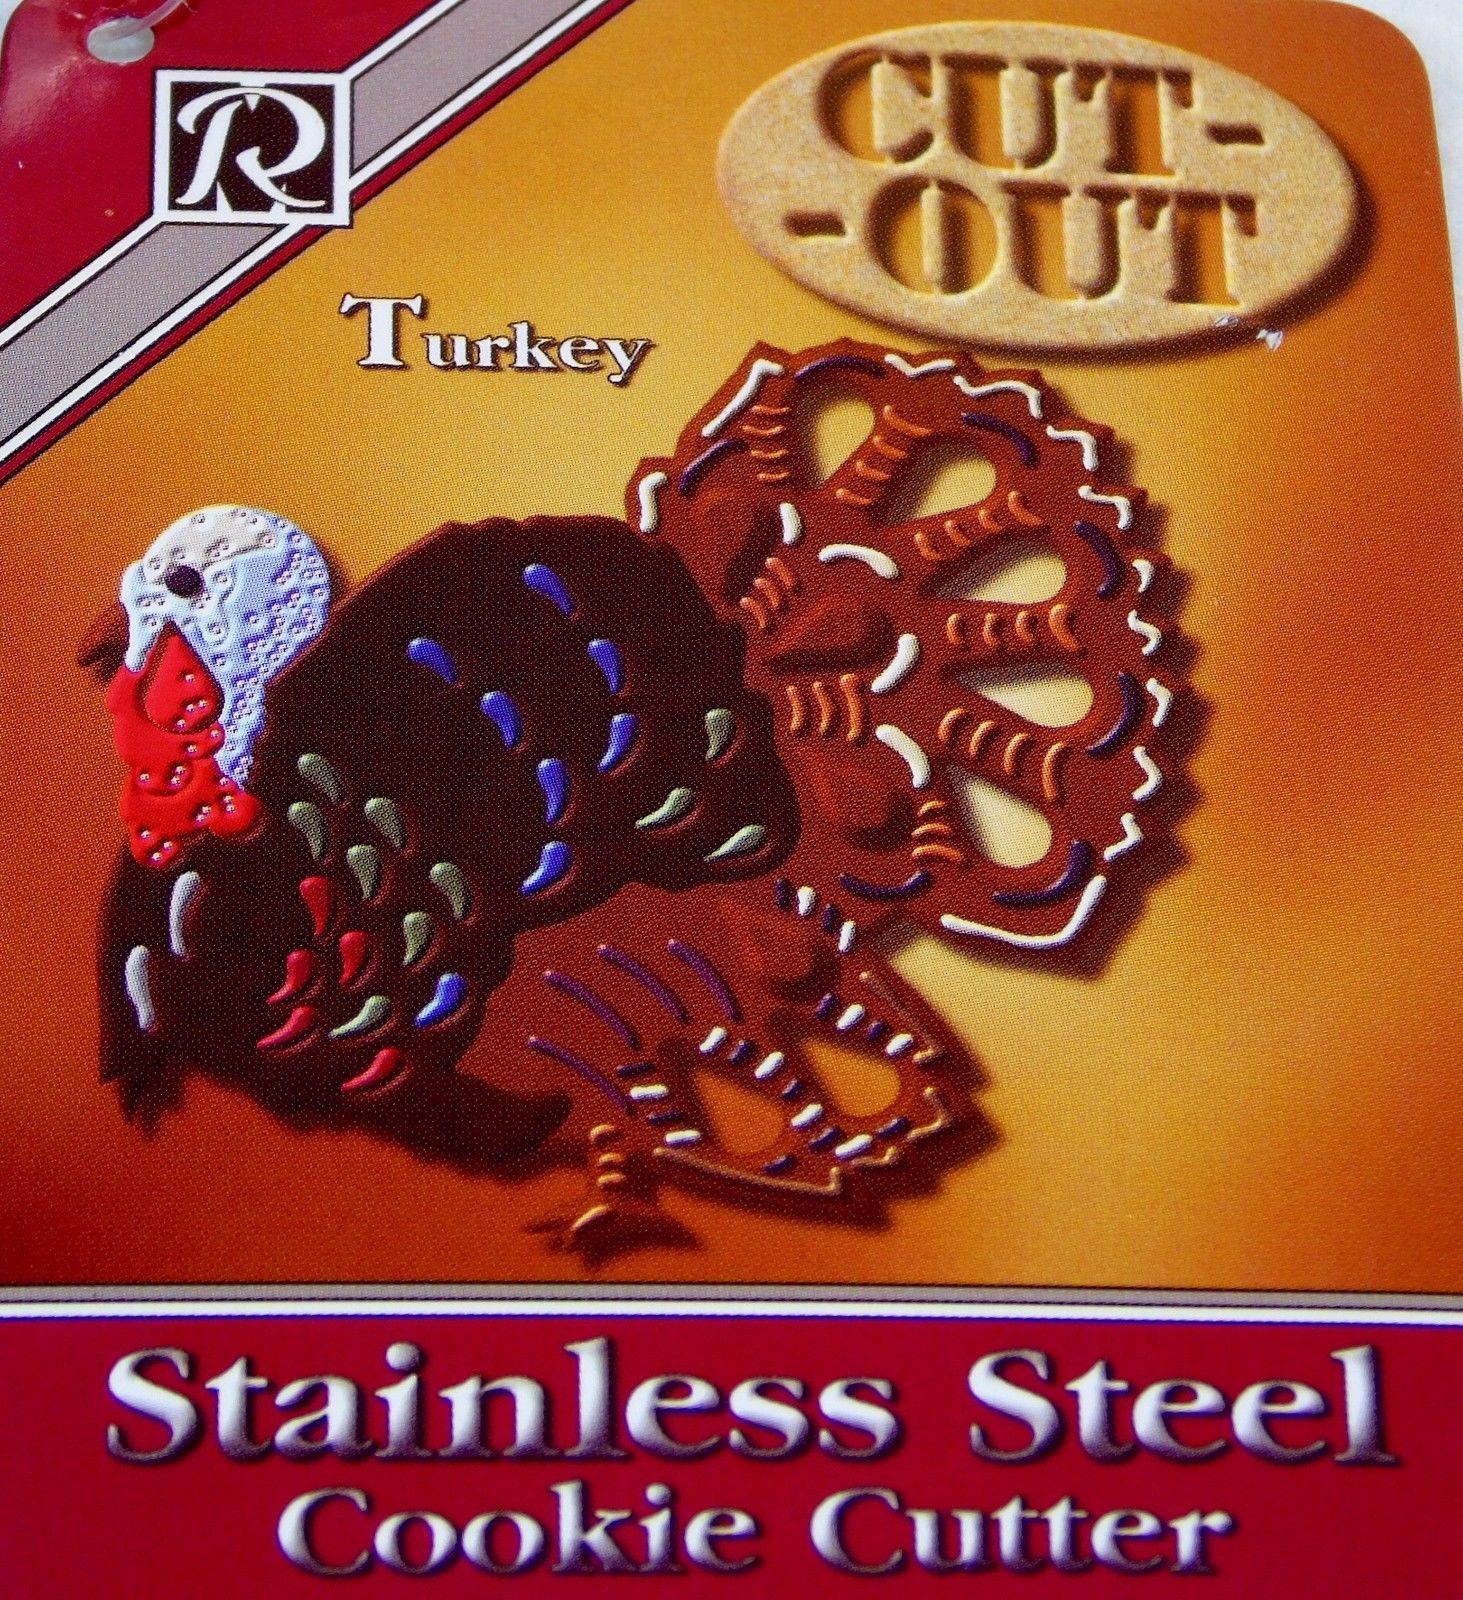 7" Cookie Cutter Thanksgiving Turkey Stainless Steel Cut-Out ~ BIG & BEAUTIFUL! - $9.75